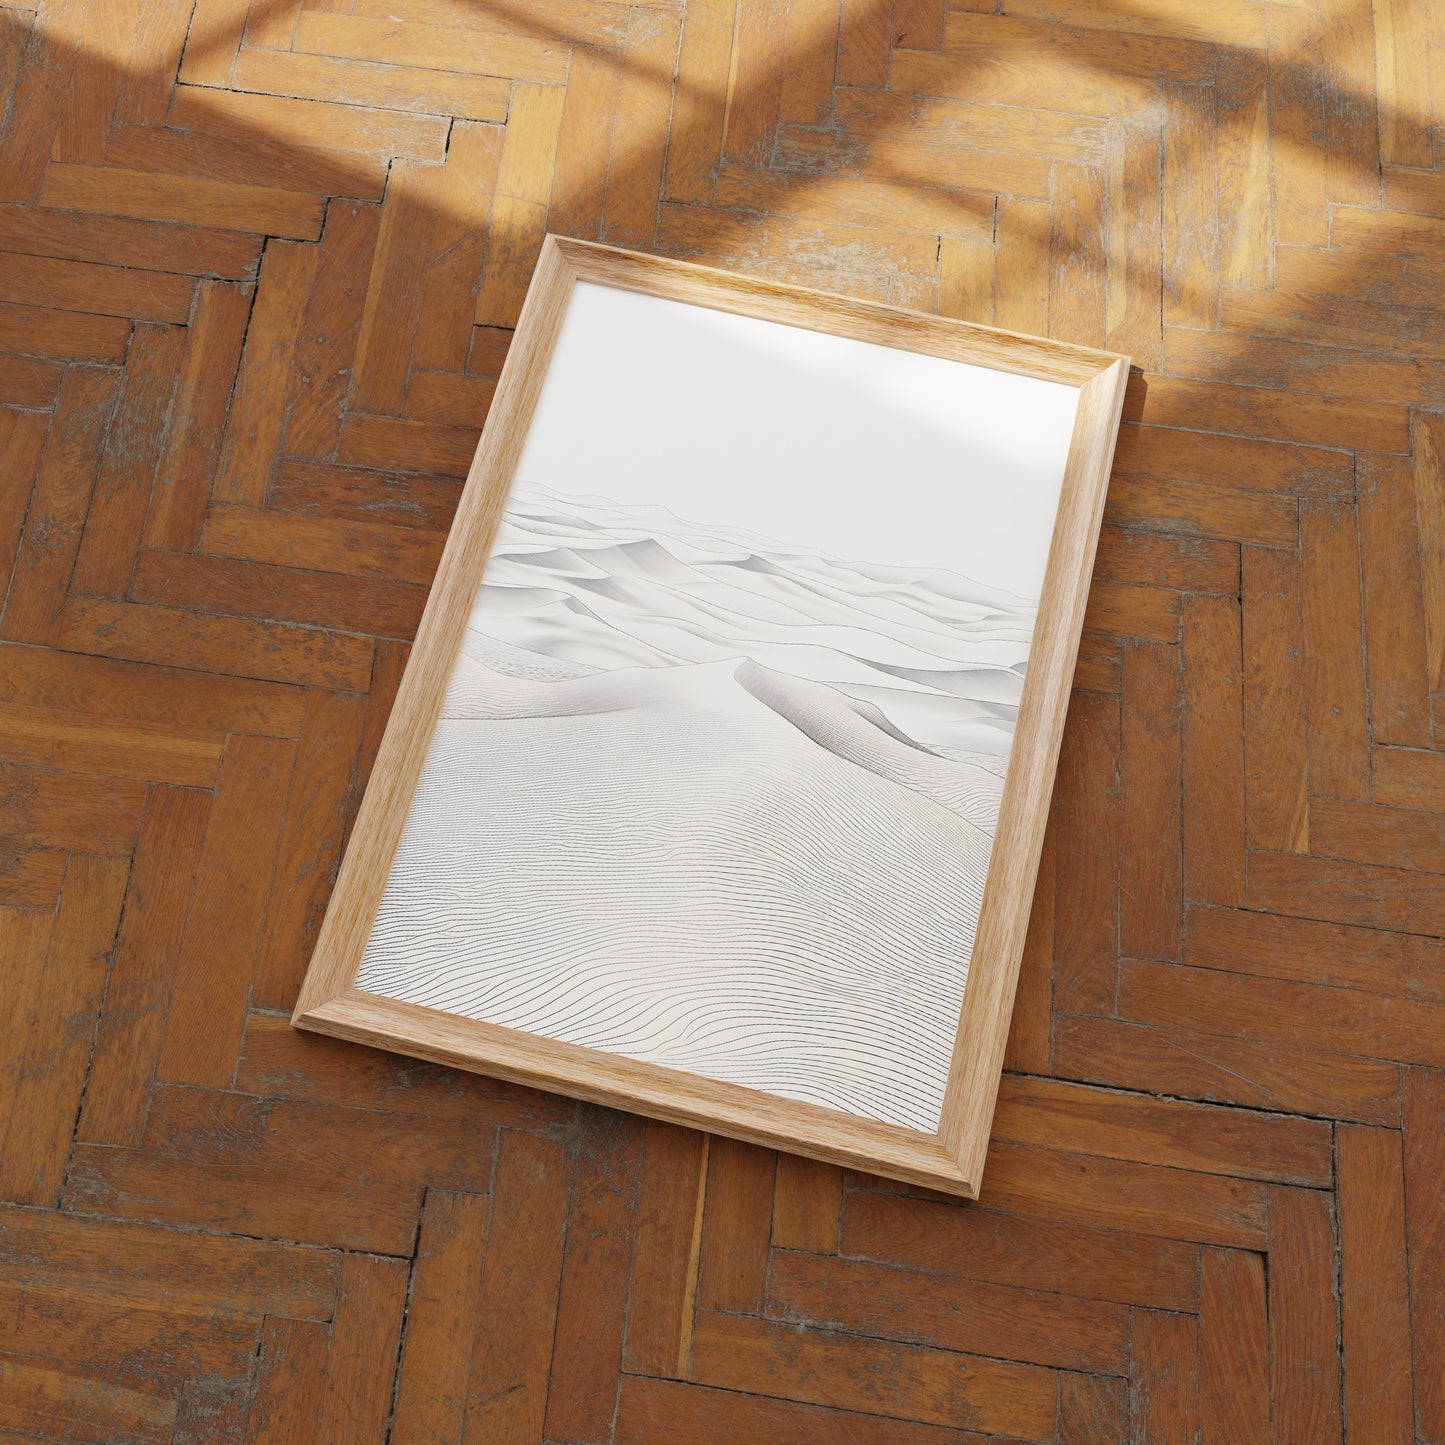 A framed picture of sand dunes lying on a herringbone pattern wood floor.